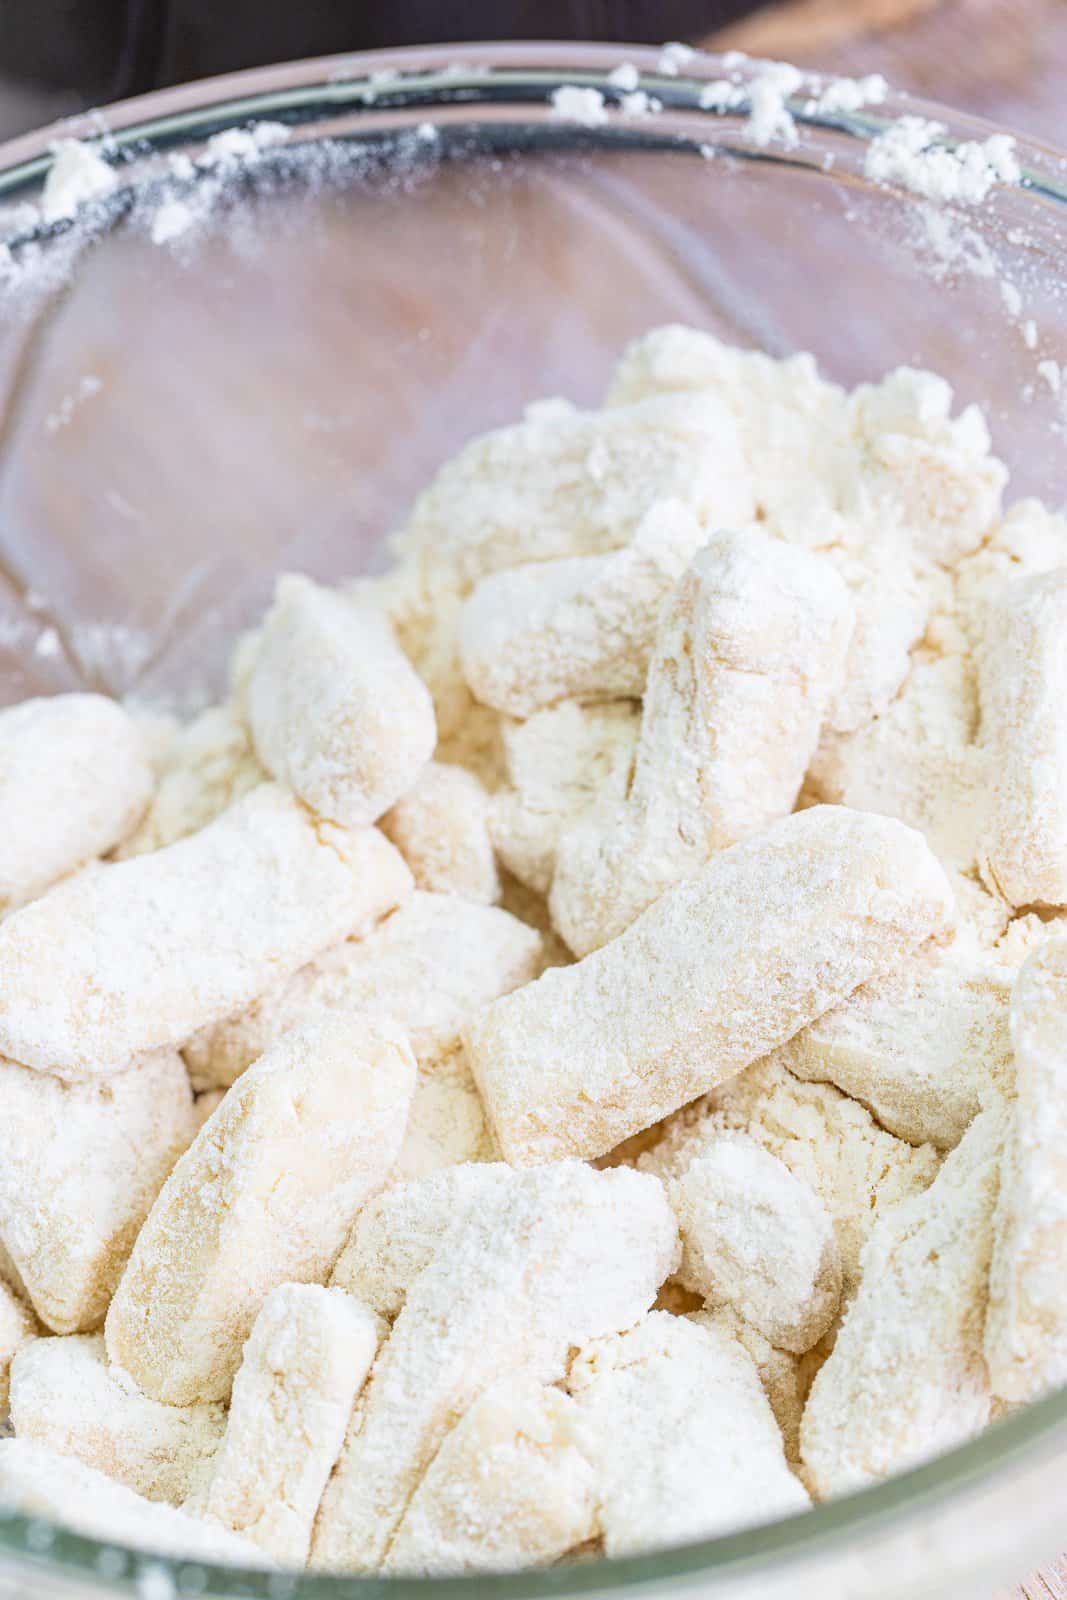 coating biscuits in flour in a bowl.